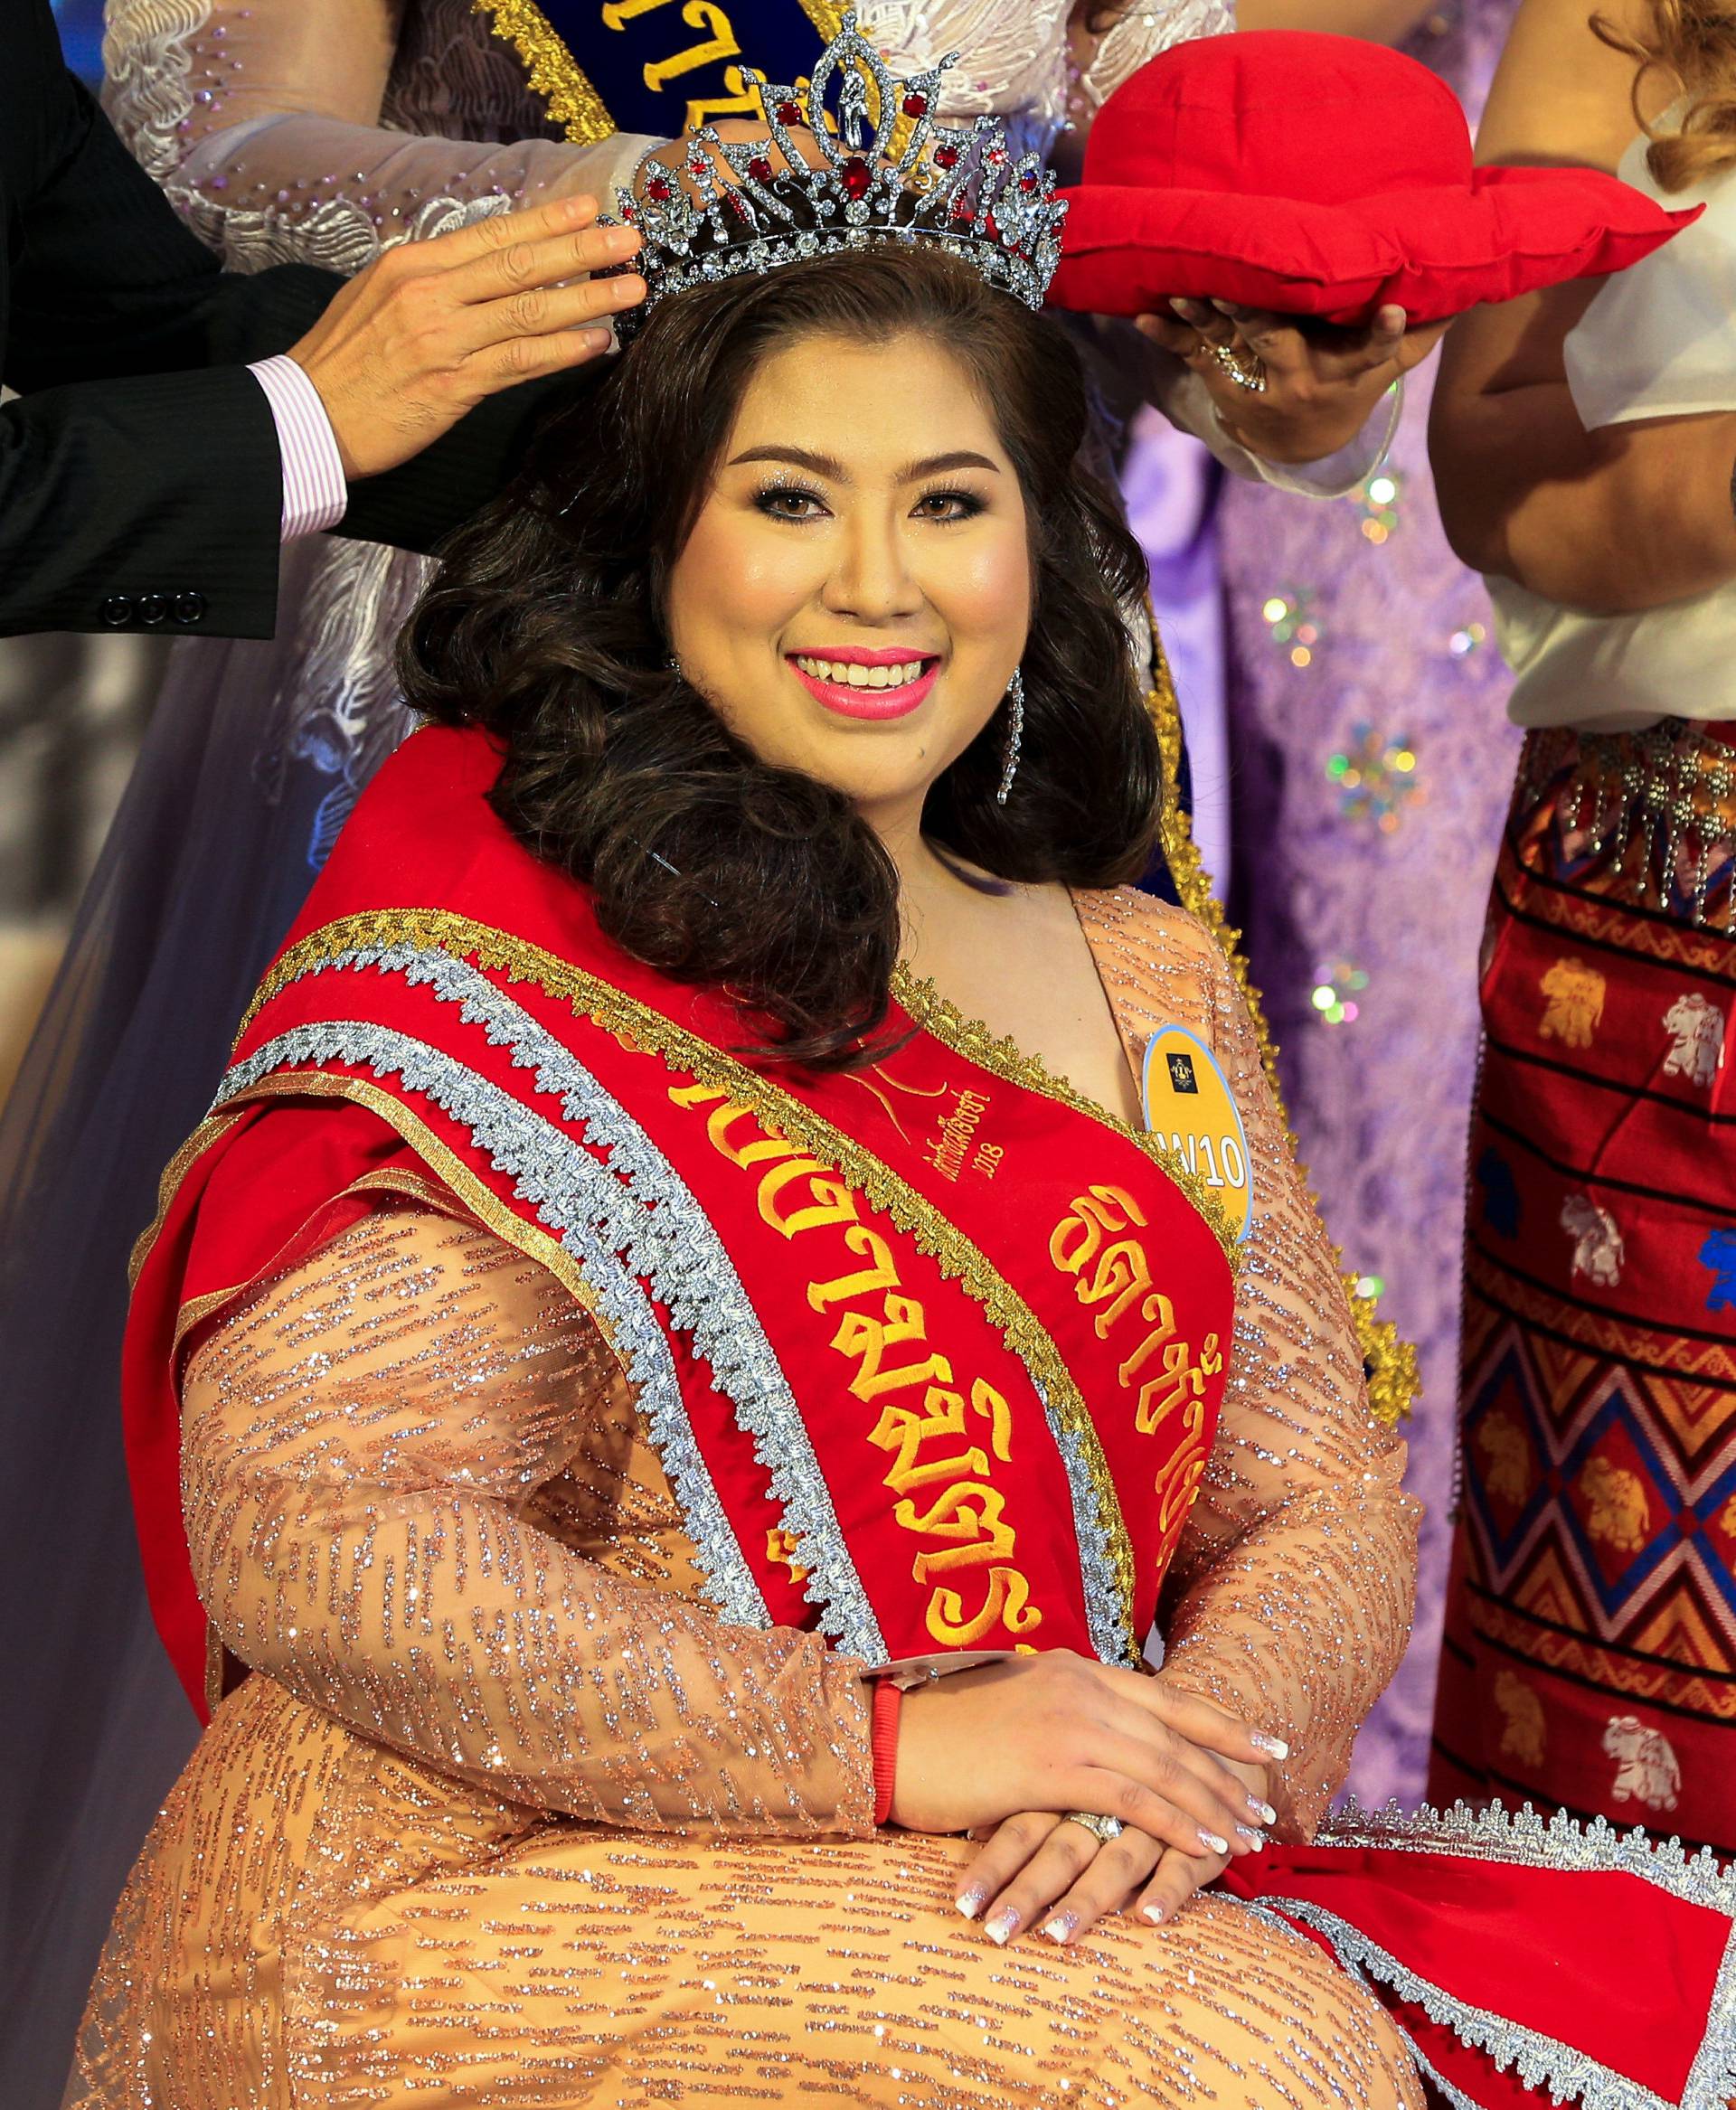 Contestant Kwanrapee Boonchaisuk reacts as she is crowned winner of the Miss Jumbo 2018 at a department store in Nakhon Ratchasima